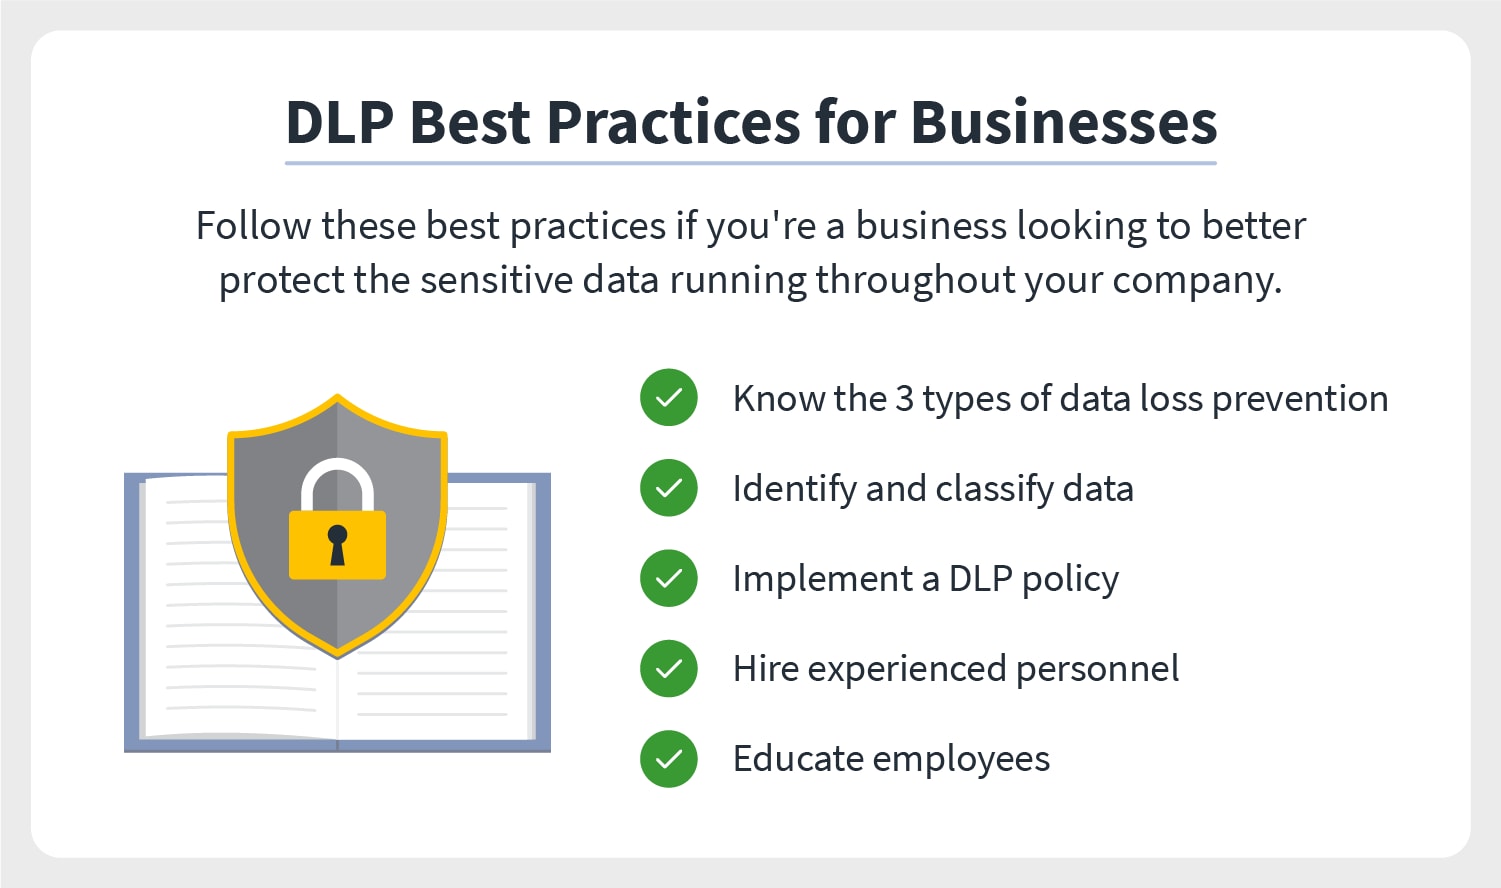 An illustration accompanies data loss prevention best practices for businesses to follow to protect their professional networks.